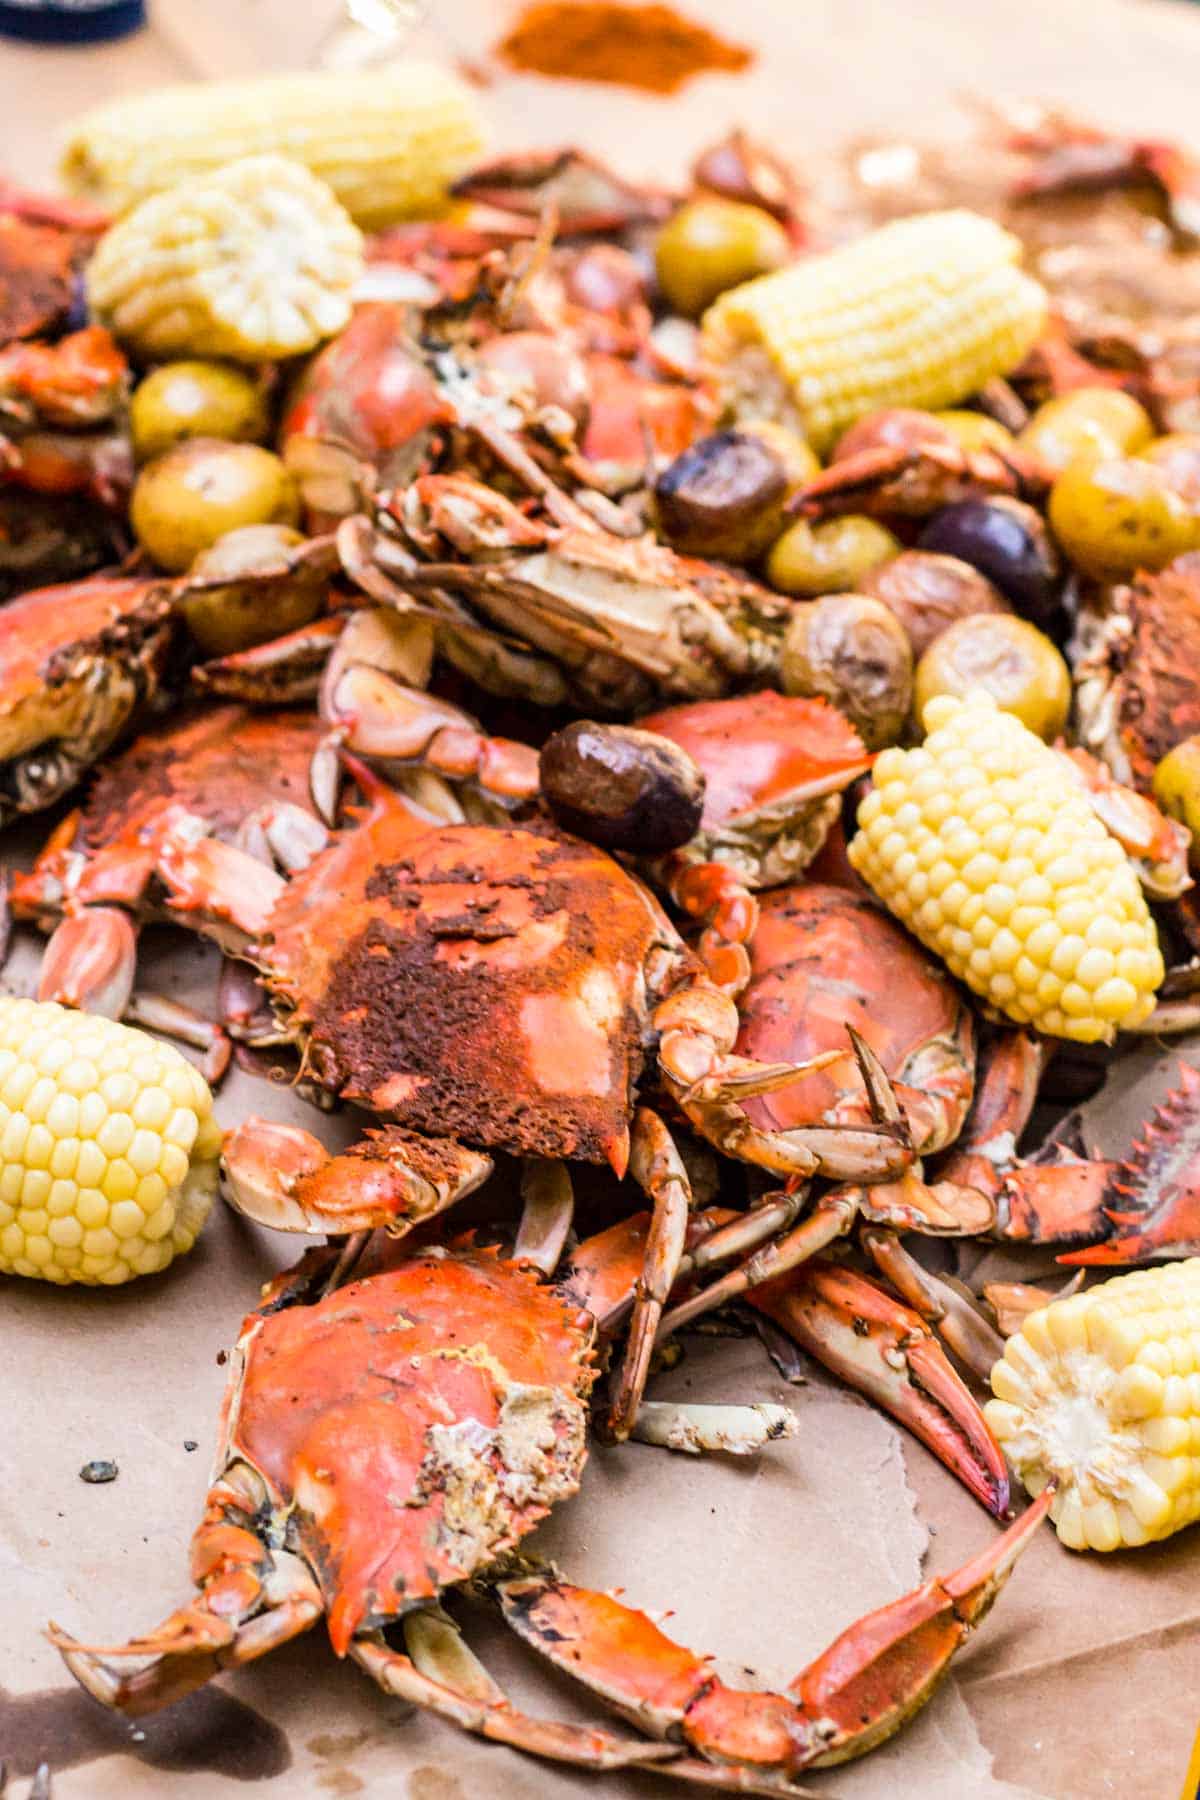 Close up of a pile of steamed crabs and corn on the cob.